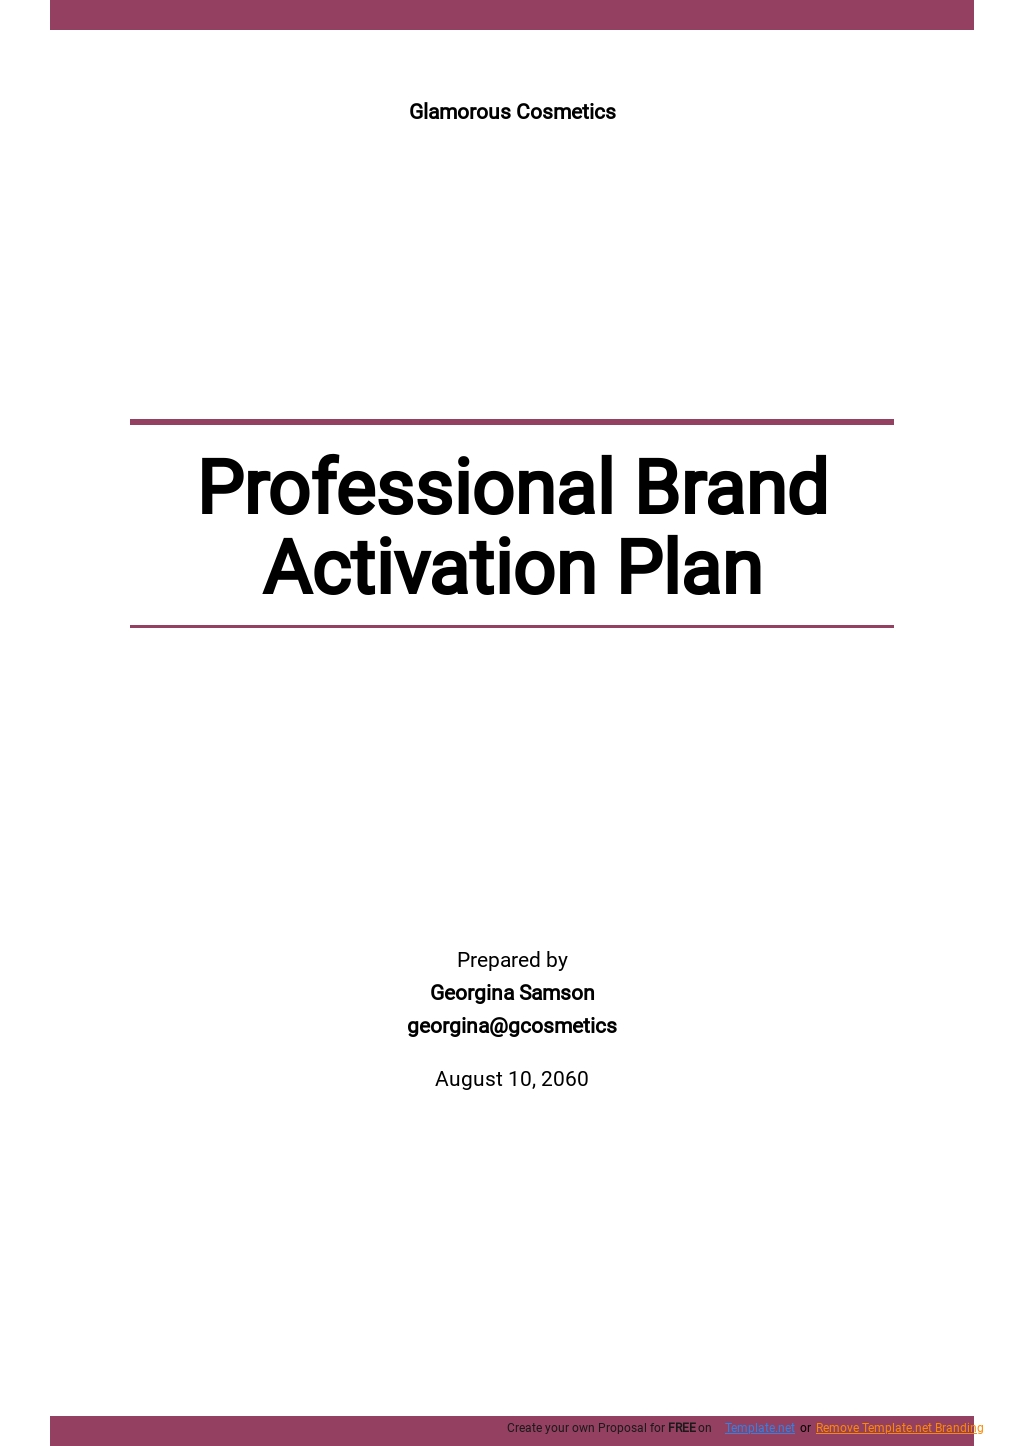 Professional Brand Activation Plan Template .jpe